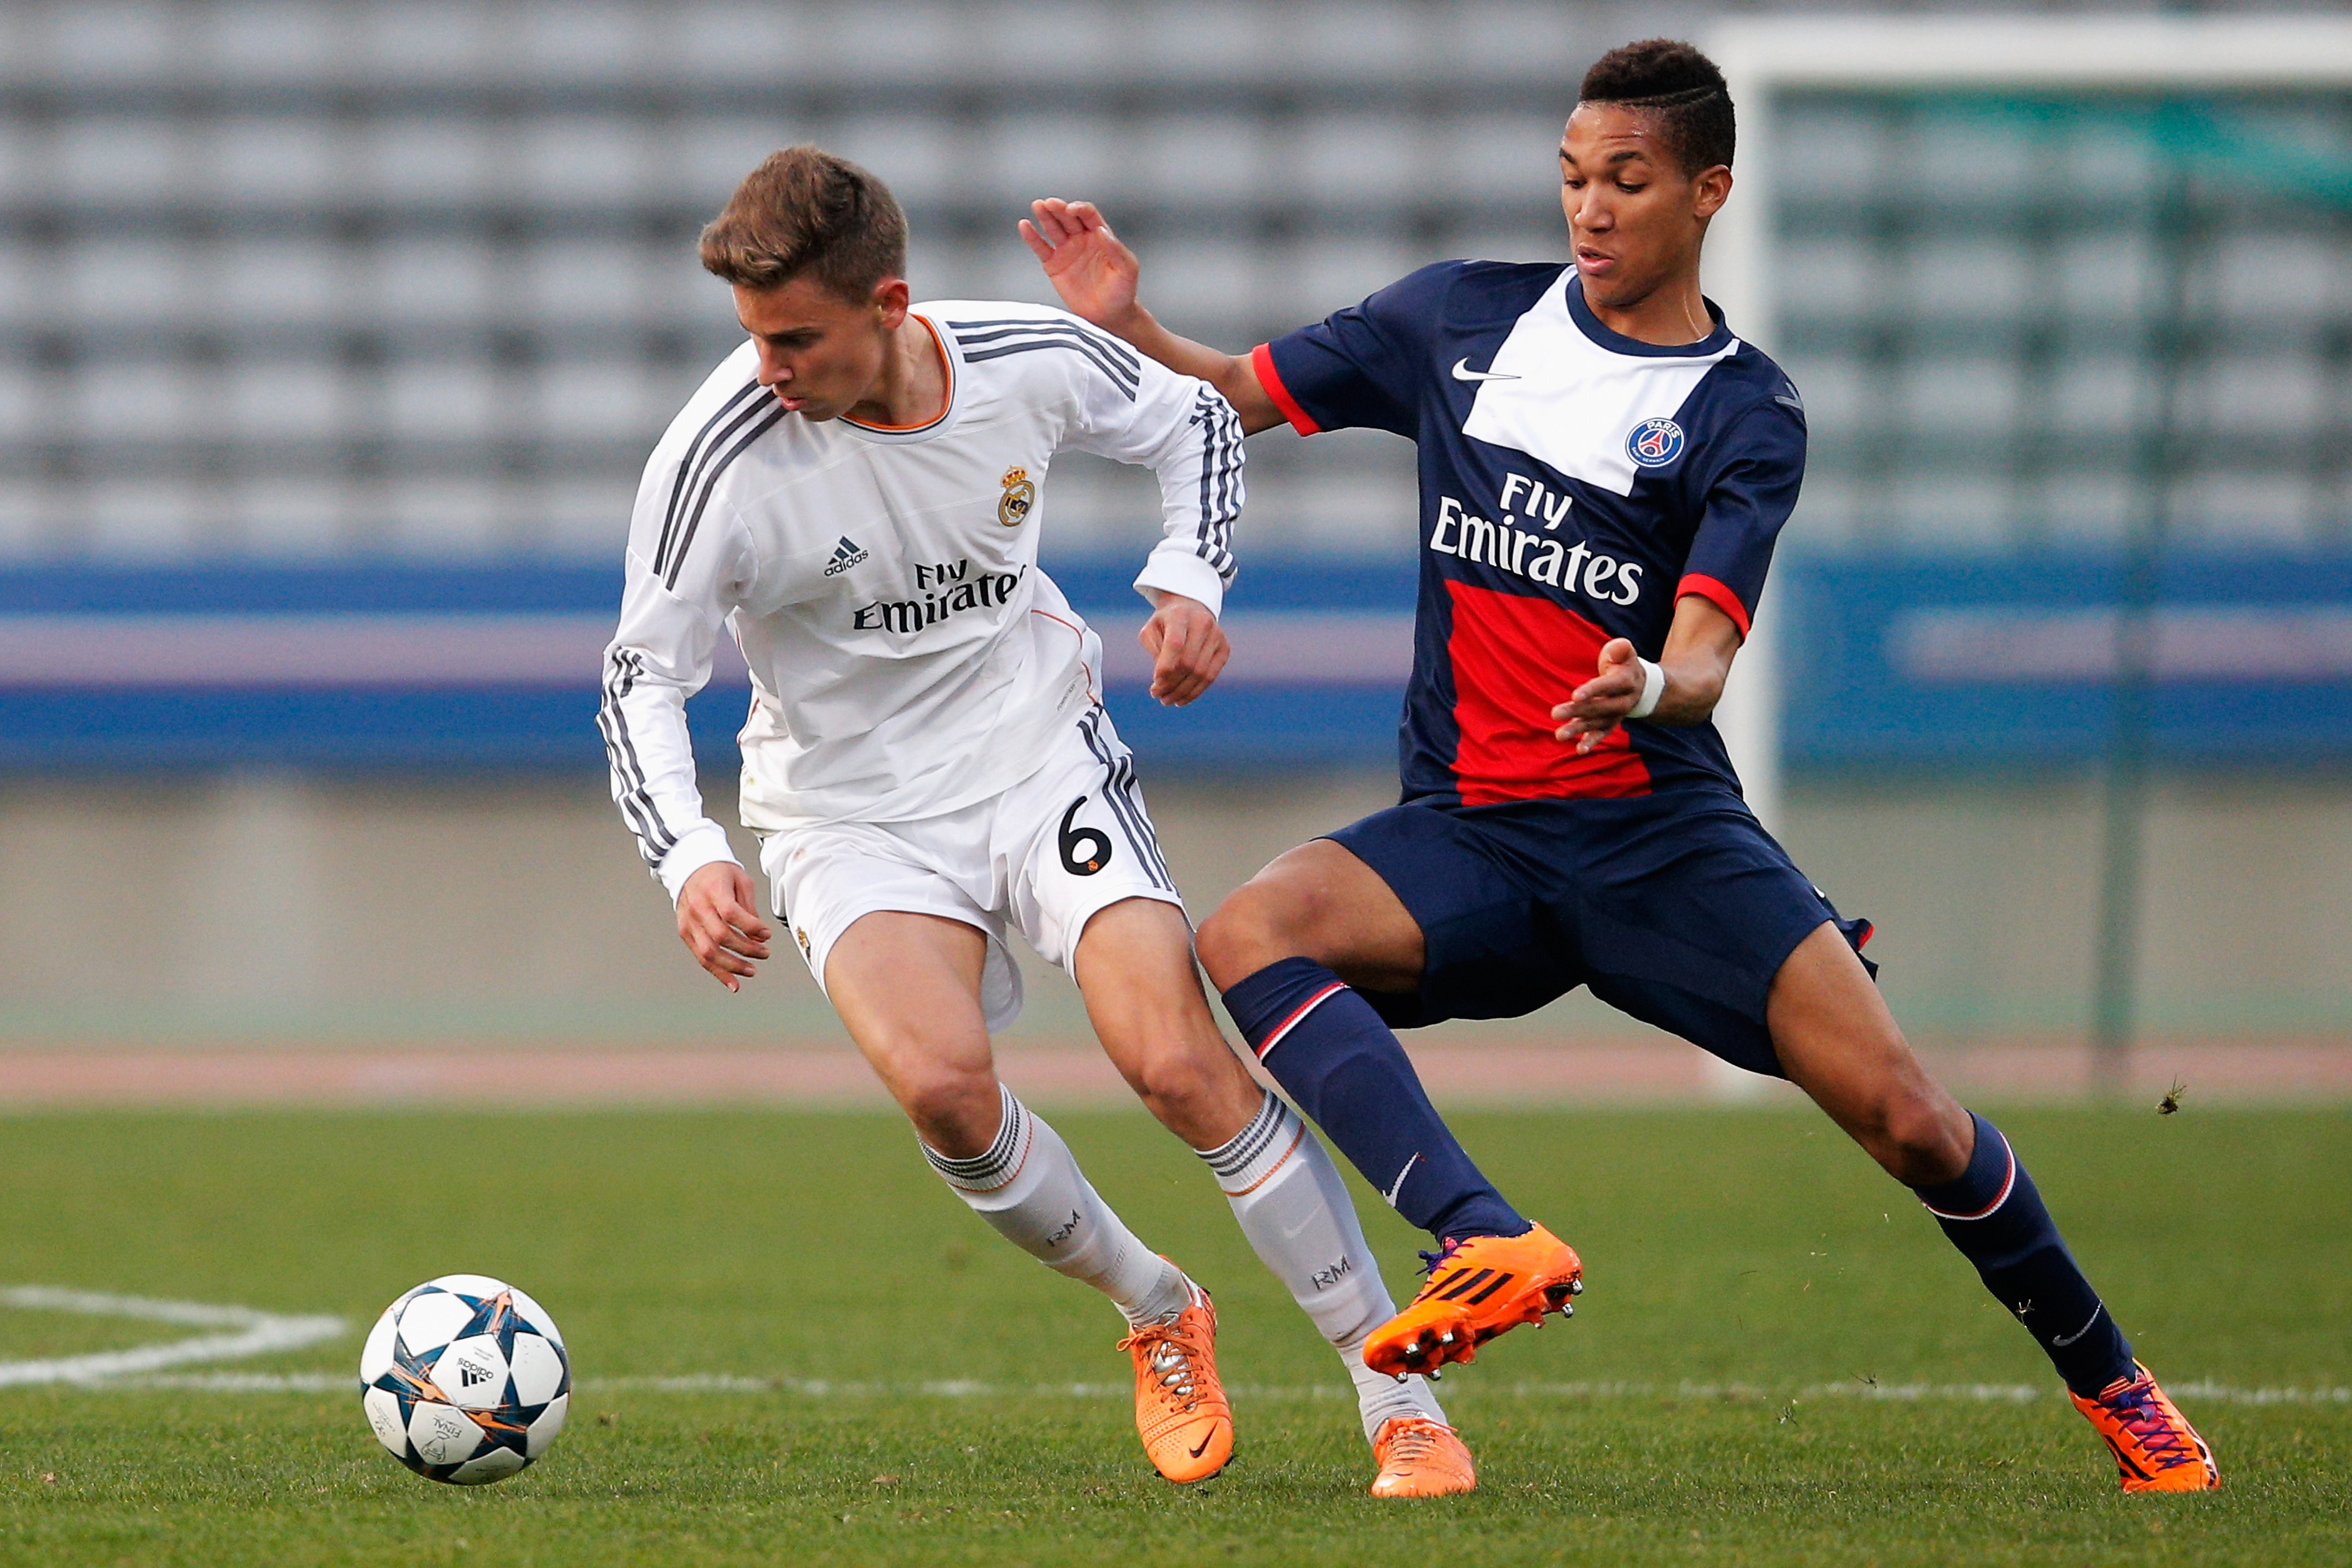 PARIS, FRANCE - MARCH 11:  Mickael Latour of PSG battles for the ball with Marcos Llorente of Real Madrid during the UEFA Youth League Quarter Final match between Paris Saint-Germain FC and Real Madrid at Stade Charlety on March 11, 2014 in Paris, France.  (Photo by Dean Mouhtaropoulos/Getty Images)